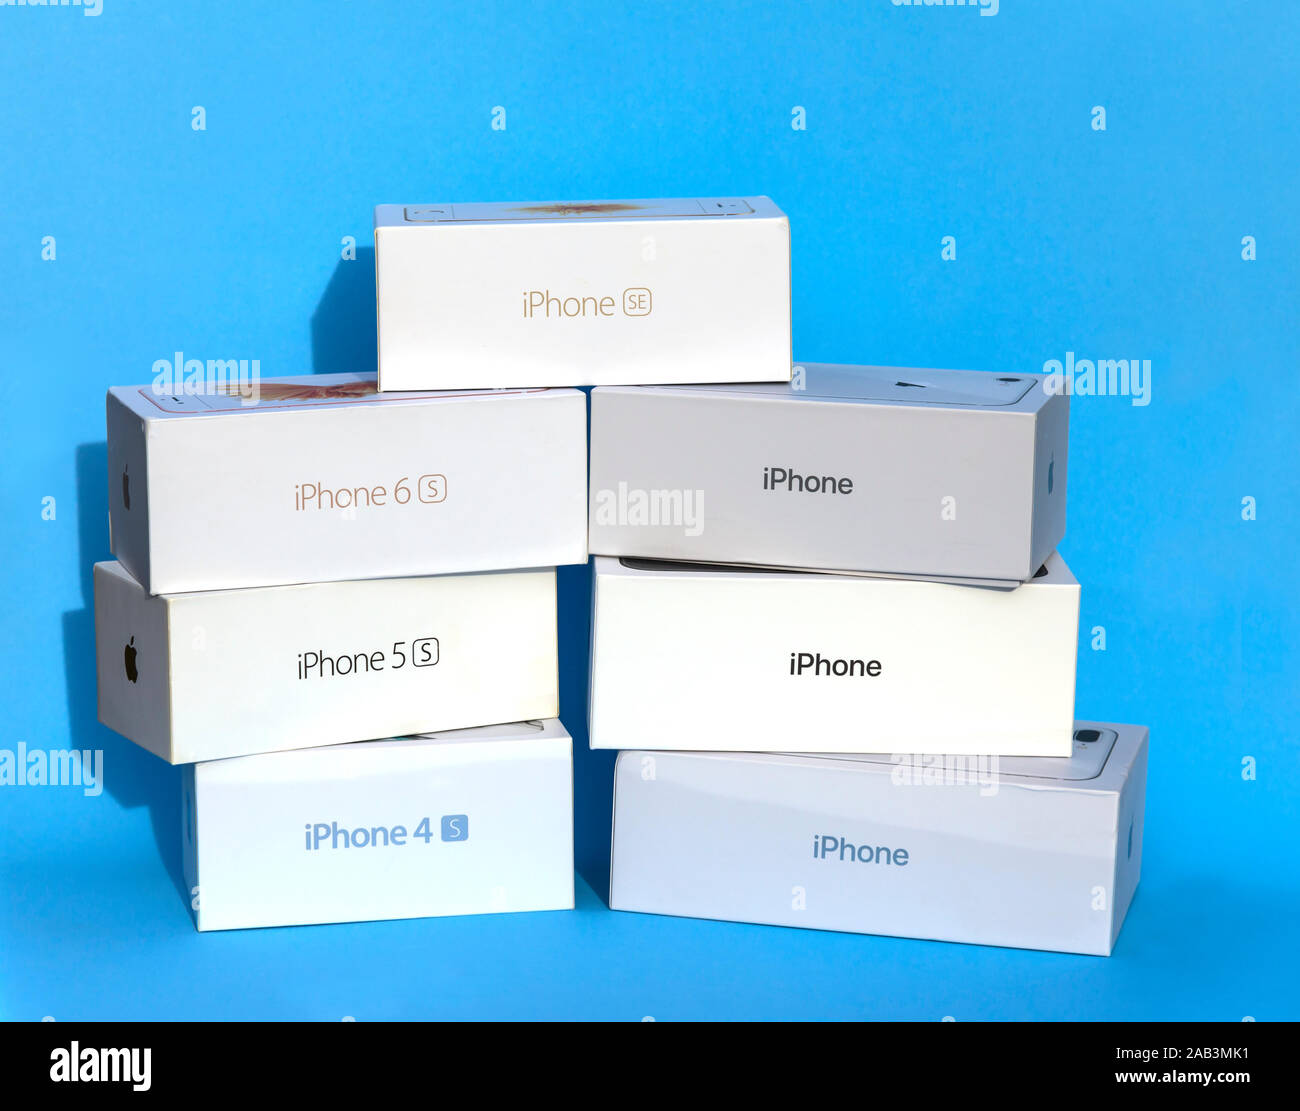 iPhone's and boxes Stock Photo